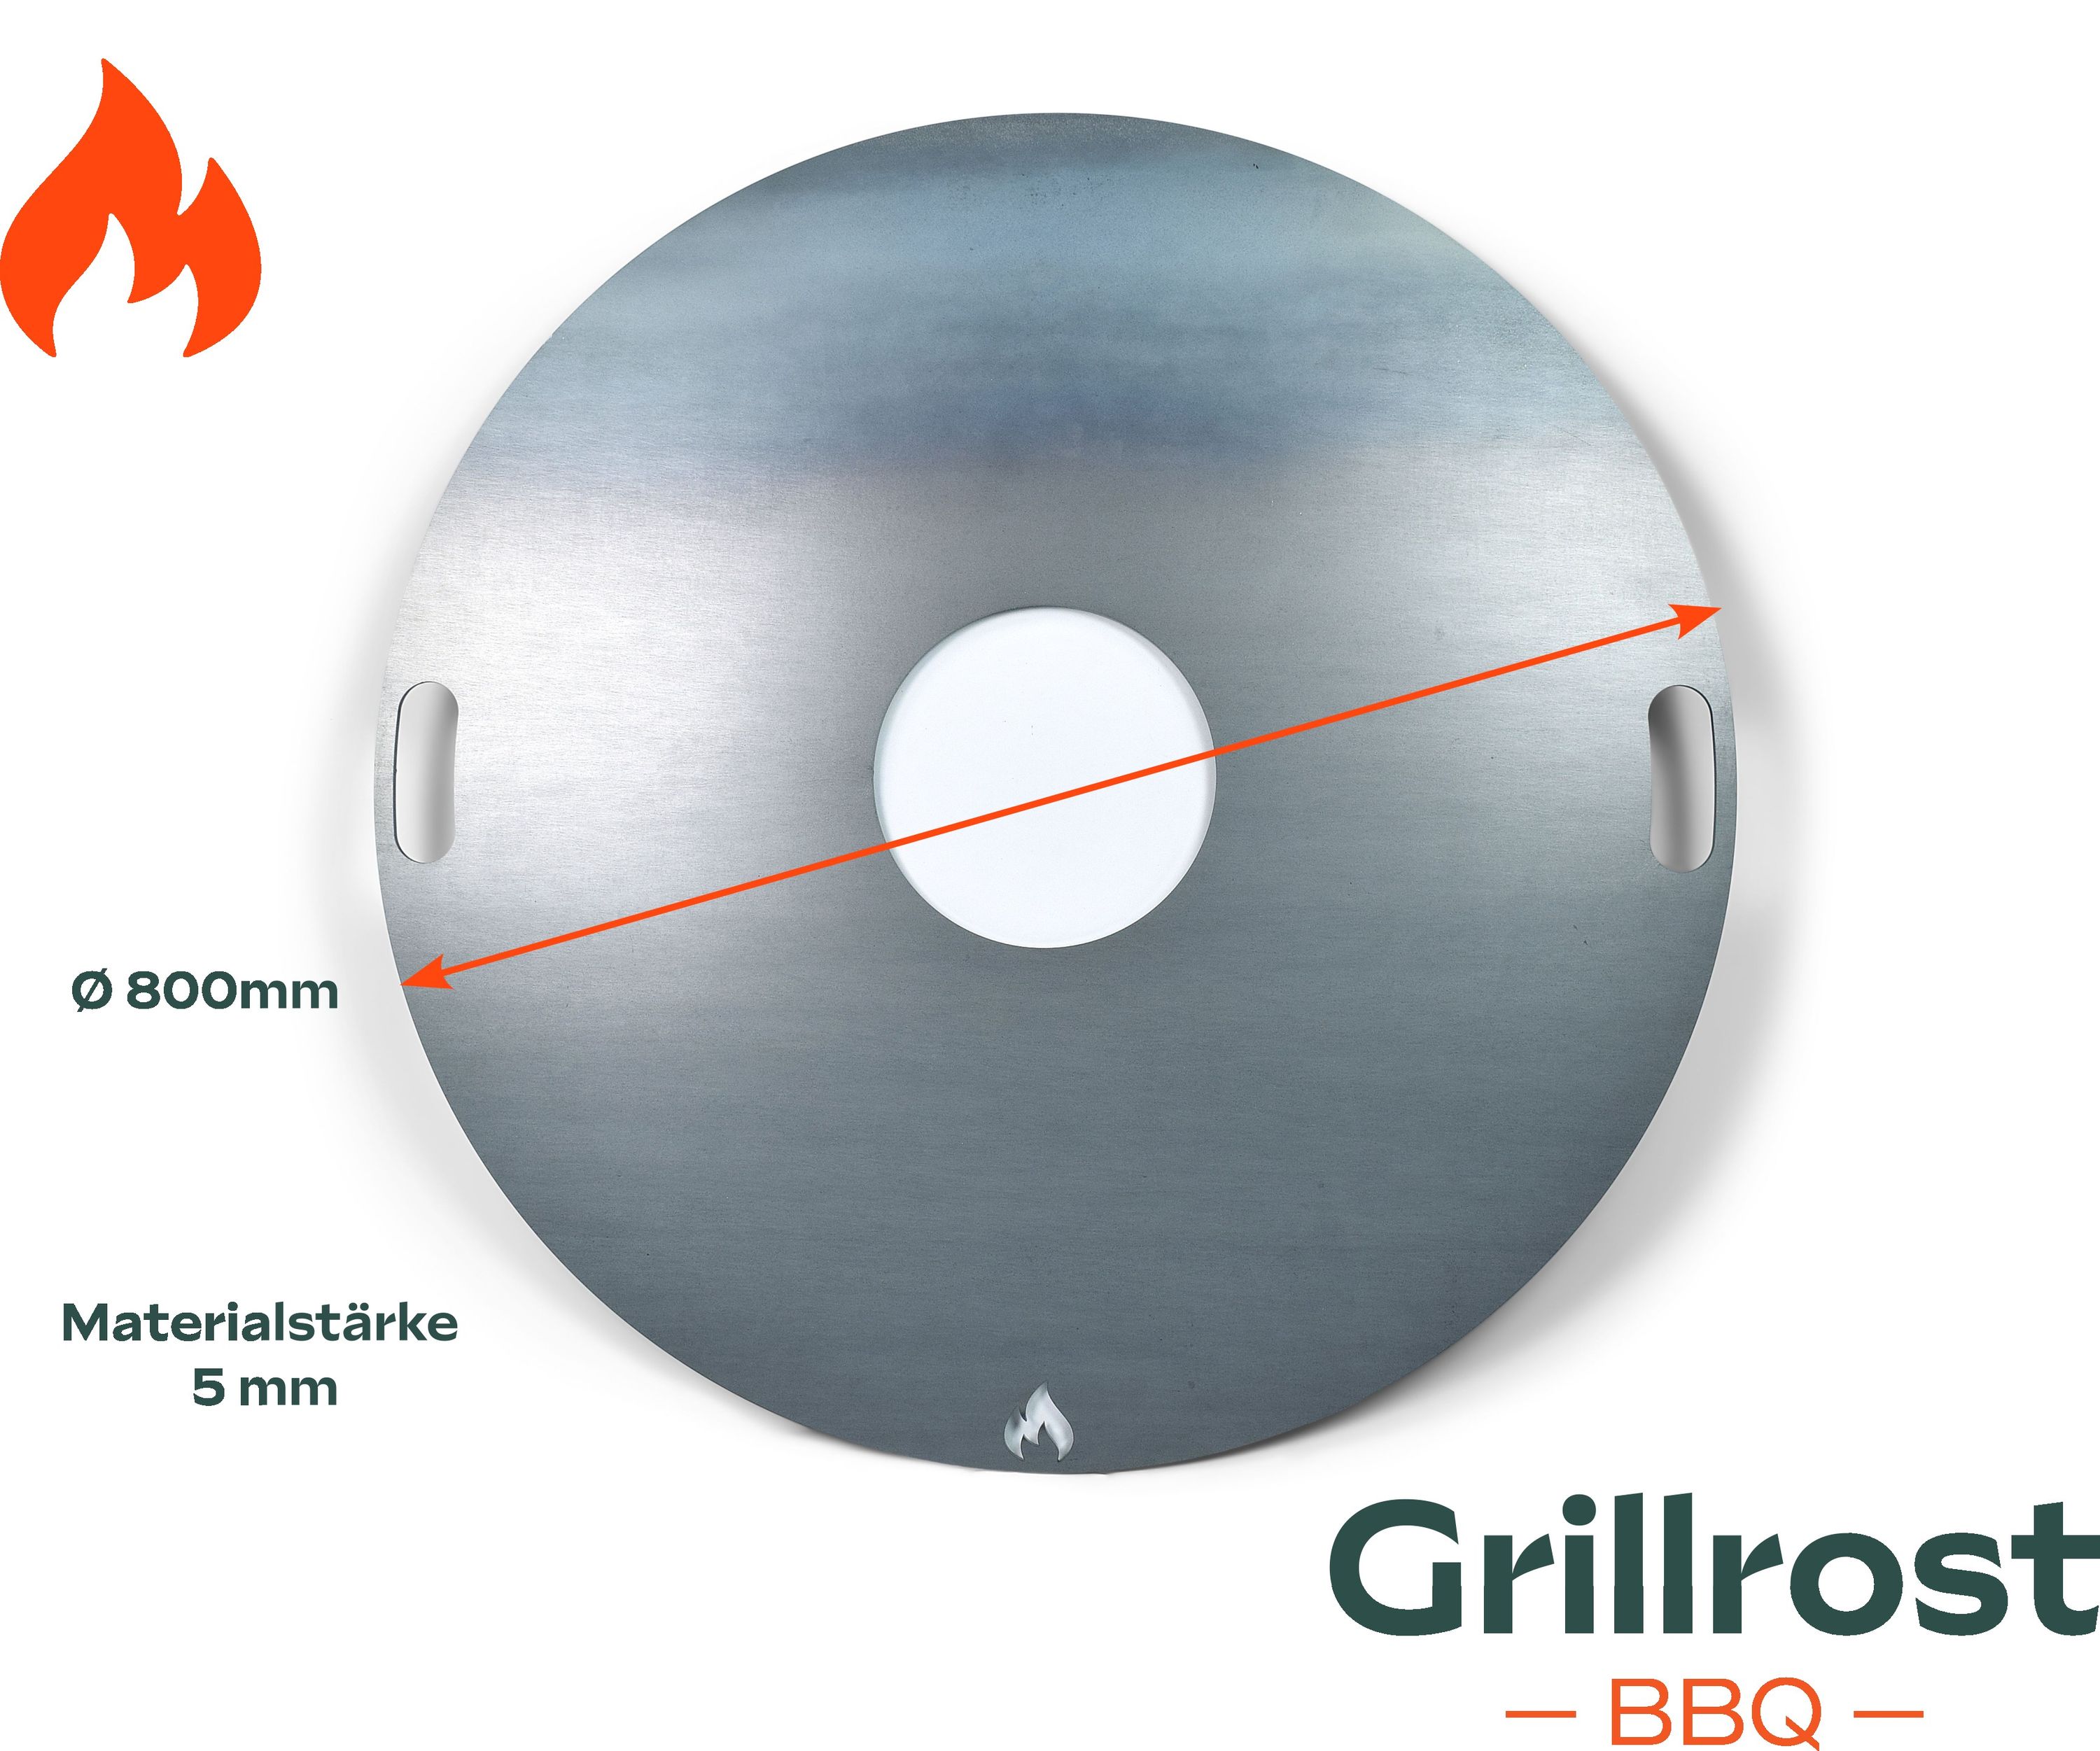 Fire plate 80 cm - 5mm fine-grained steel Solid grill plate for fire barrel kettle grill & fire bowl